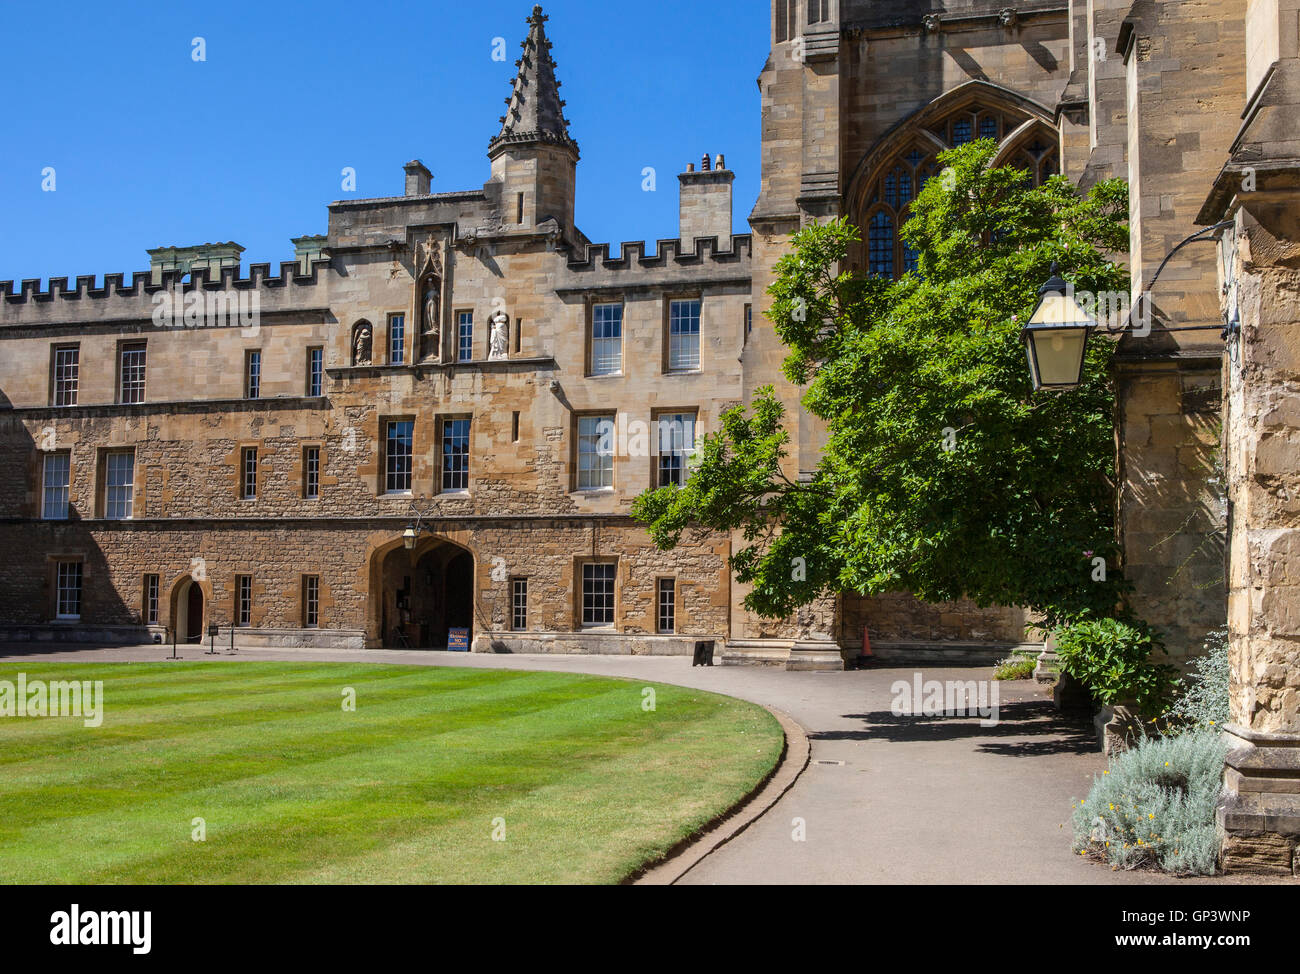 A view inside a courtyard at New College in Oxford, England.  It is one of the constituent colleges of Oxford University, UK. Stock Photo